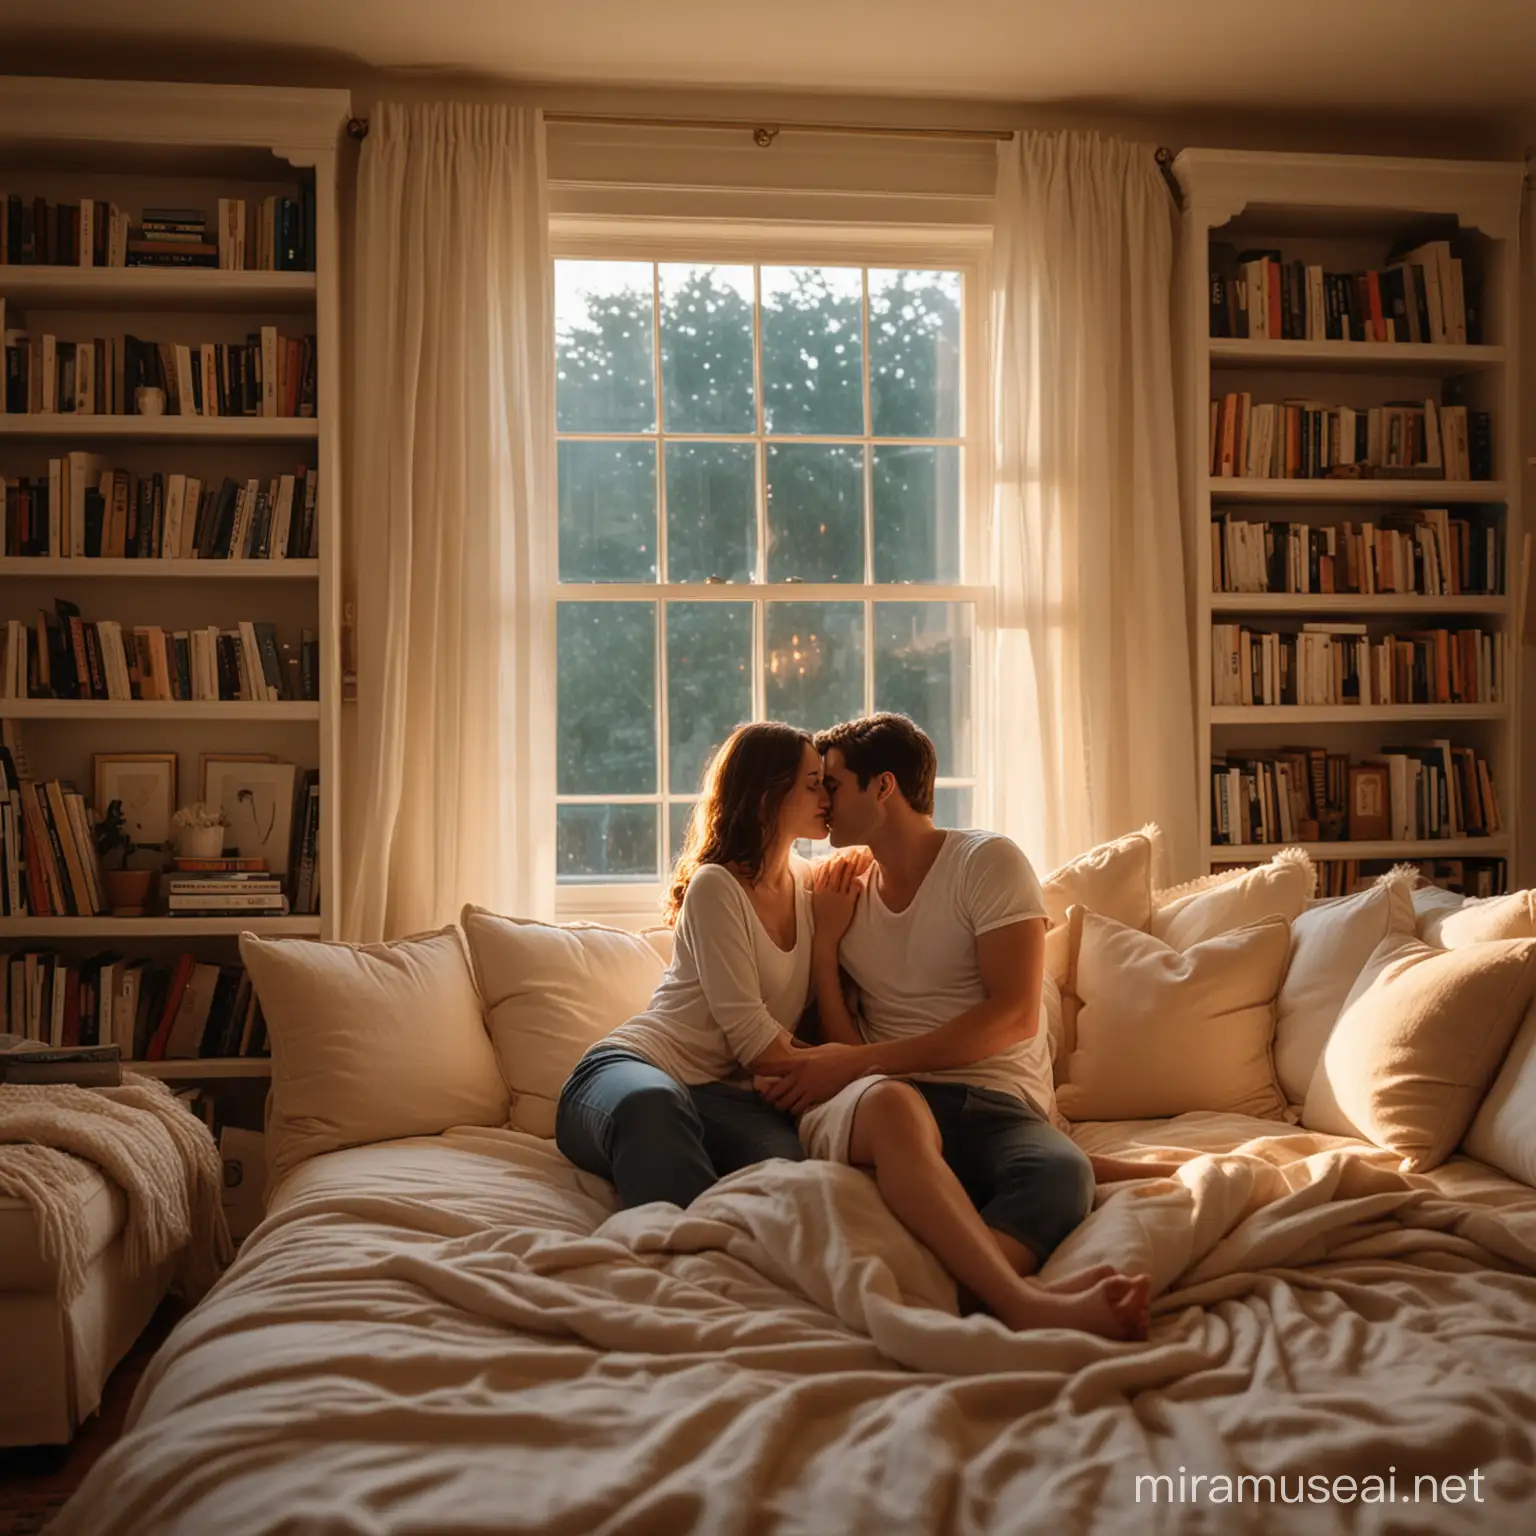 Intimate Couples Moment in Cozy Living Room at Dusk